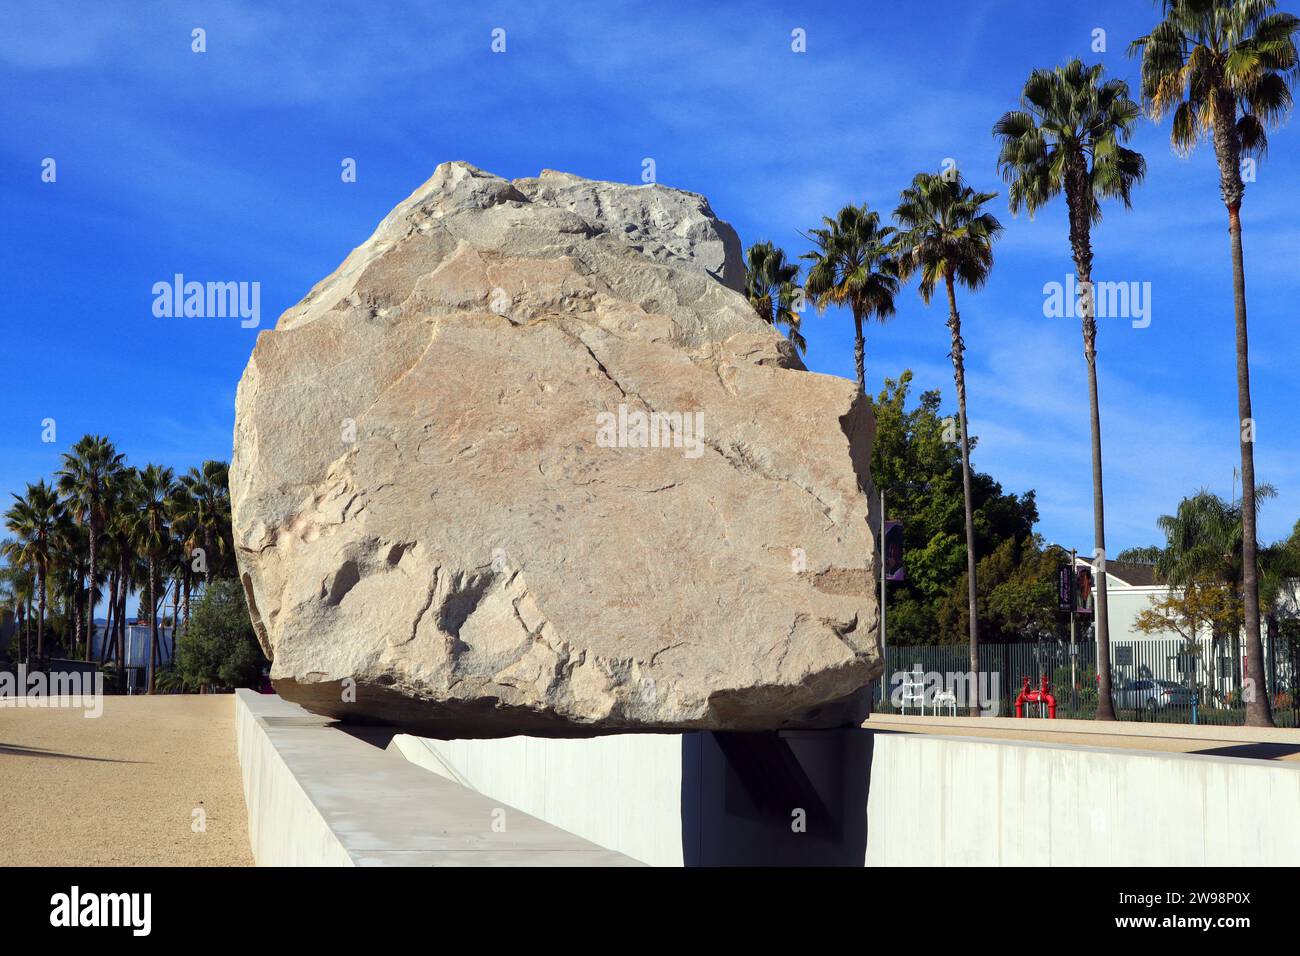 Los Angeles, California: Public Art LEVITATED MASS a sculpture by Michael Heizer at the LACMA, Los Angeles County Museum of Art Stock Photo